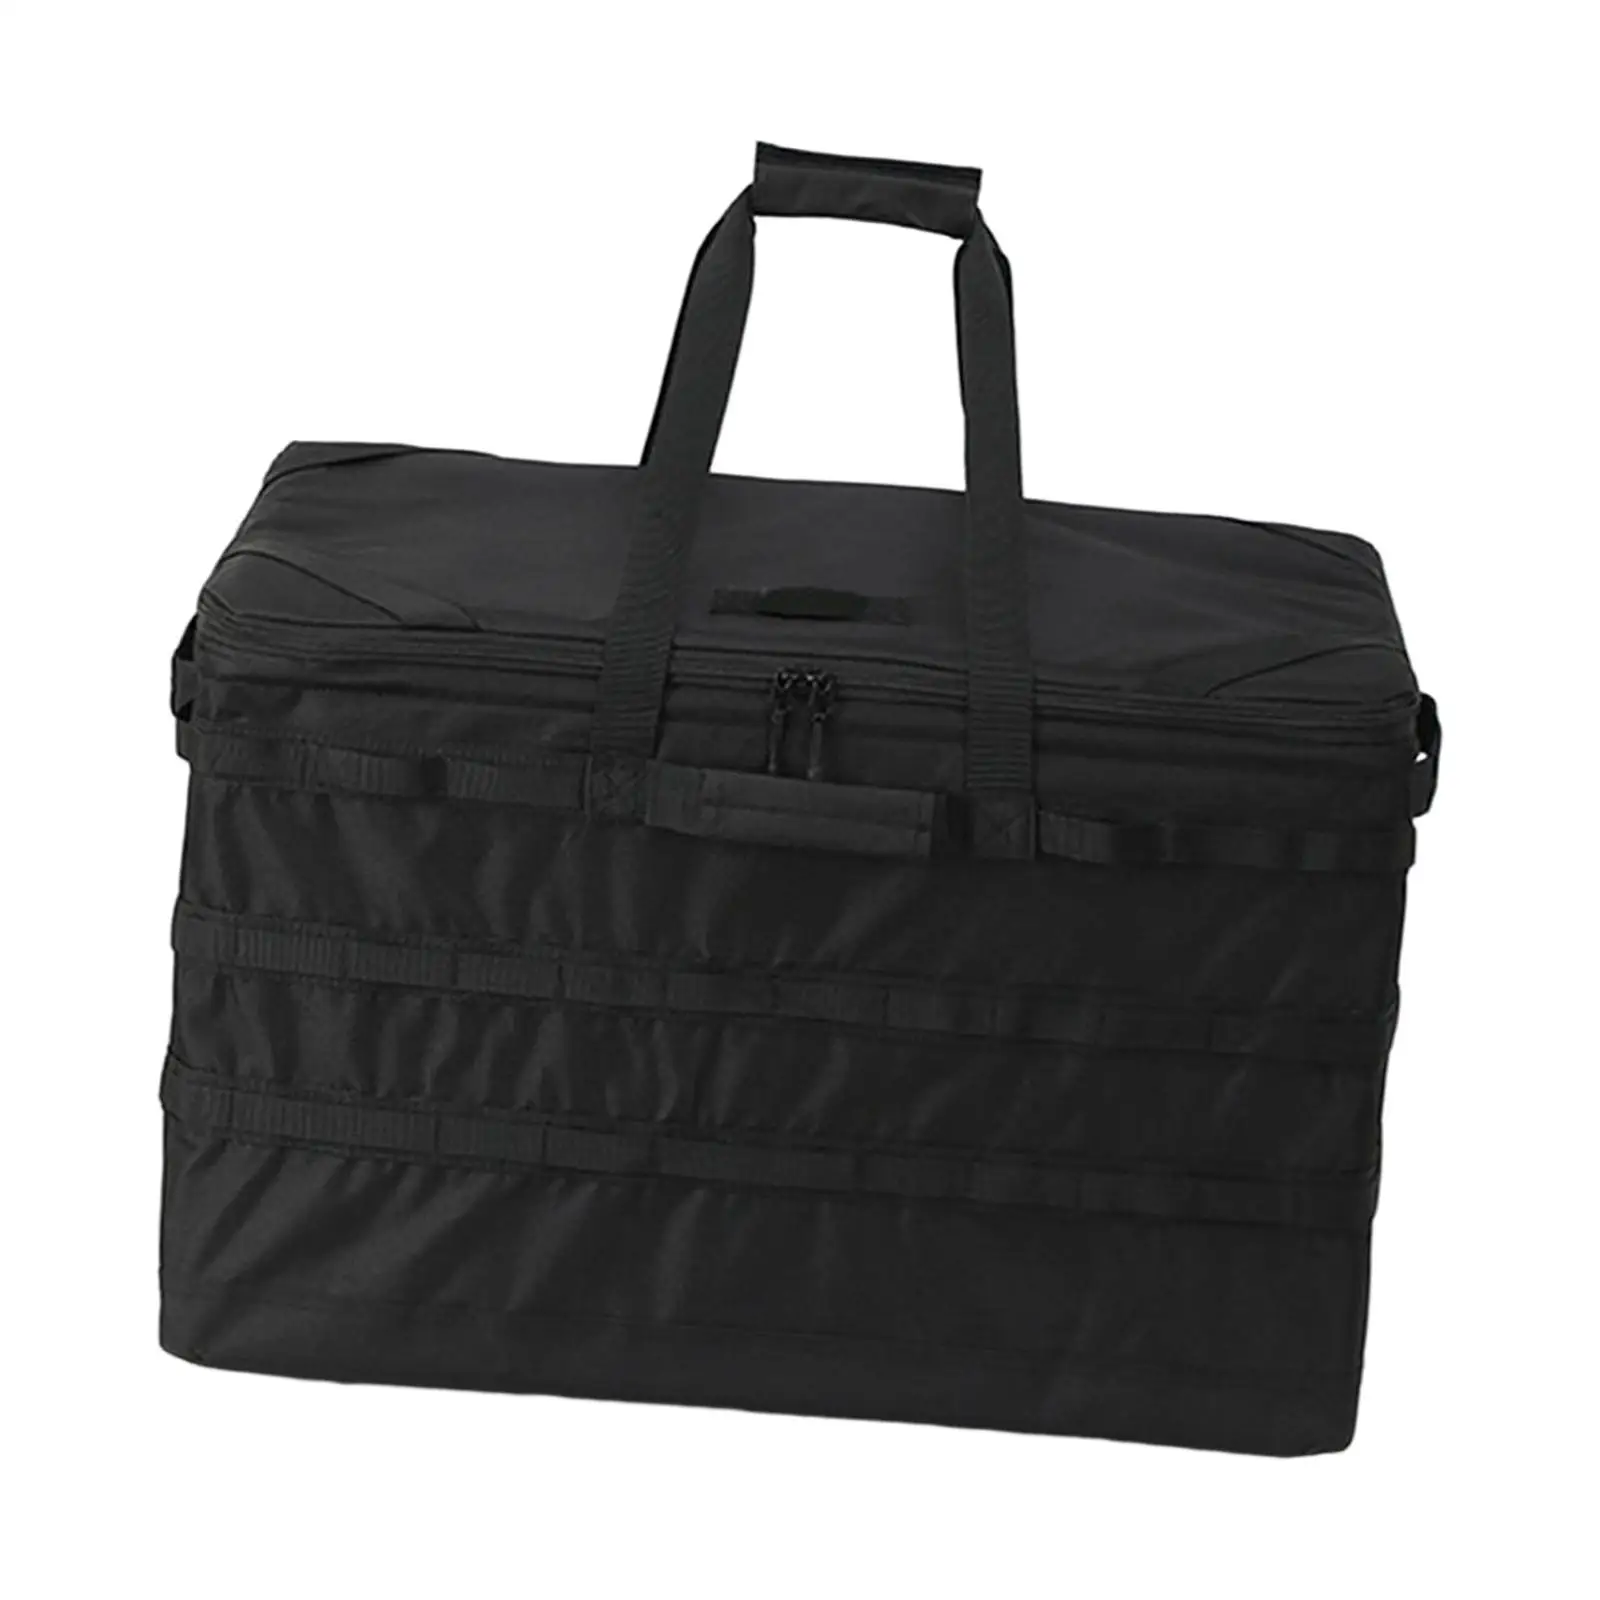 Camping Storage Bag with Pockets and Compartments Large Utility Tote Bag